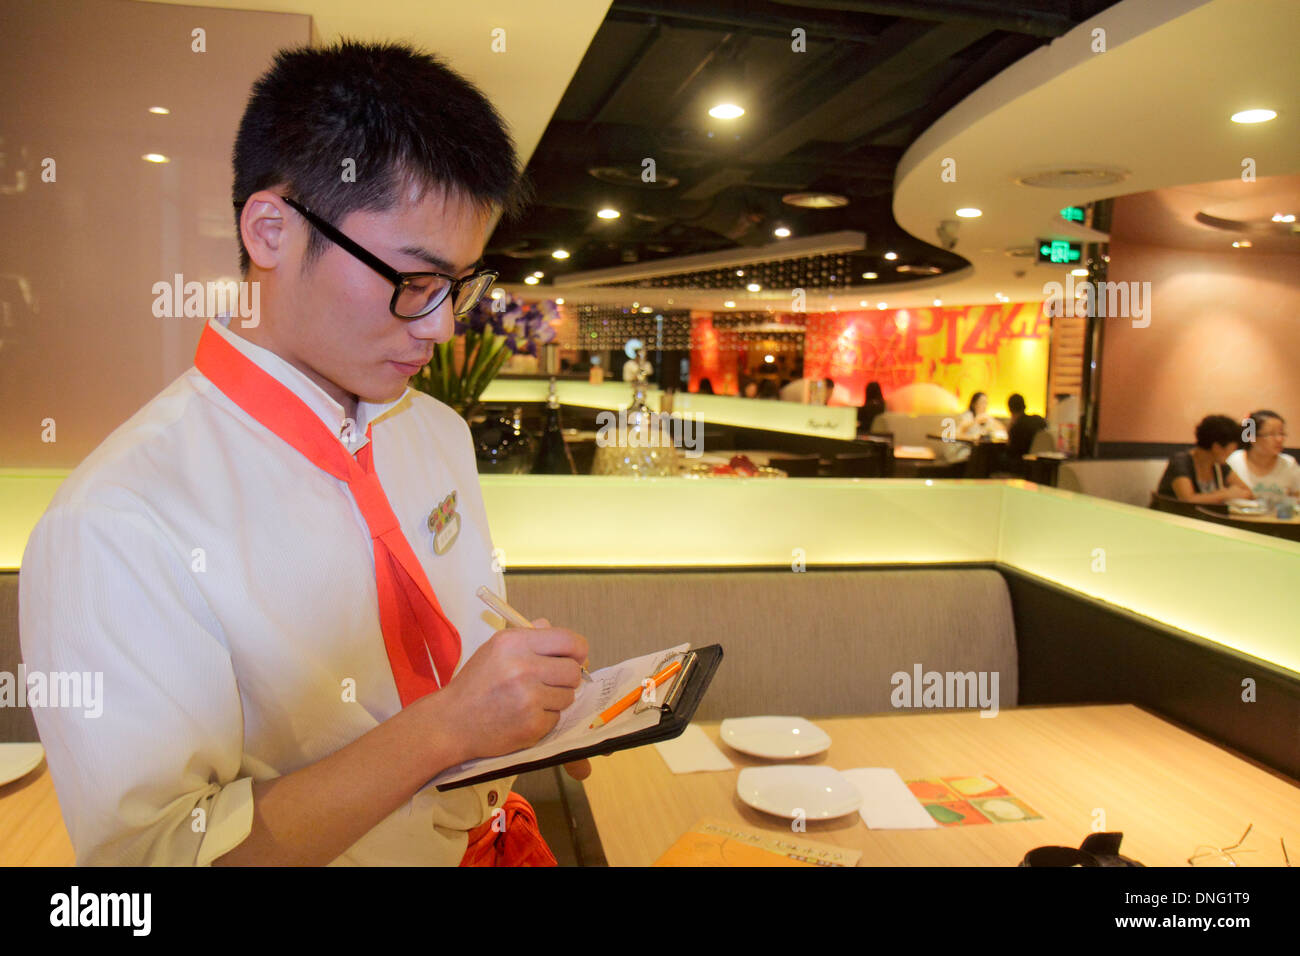 Beijing China,Chinese,The Malls at Oriental Plaza,Pizza Hut,restaurant restaurants food dining cafe cafes,cuisine,food,interior inside,Asian man men m Stock Photo